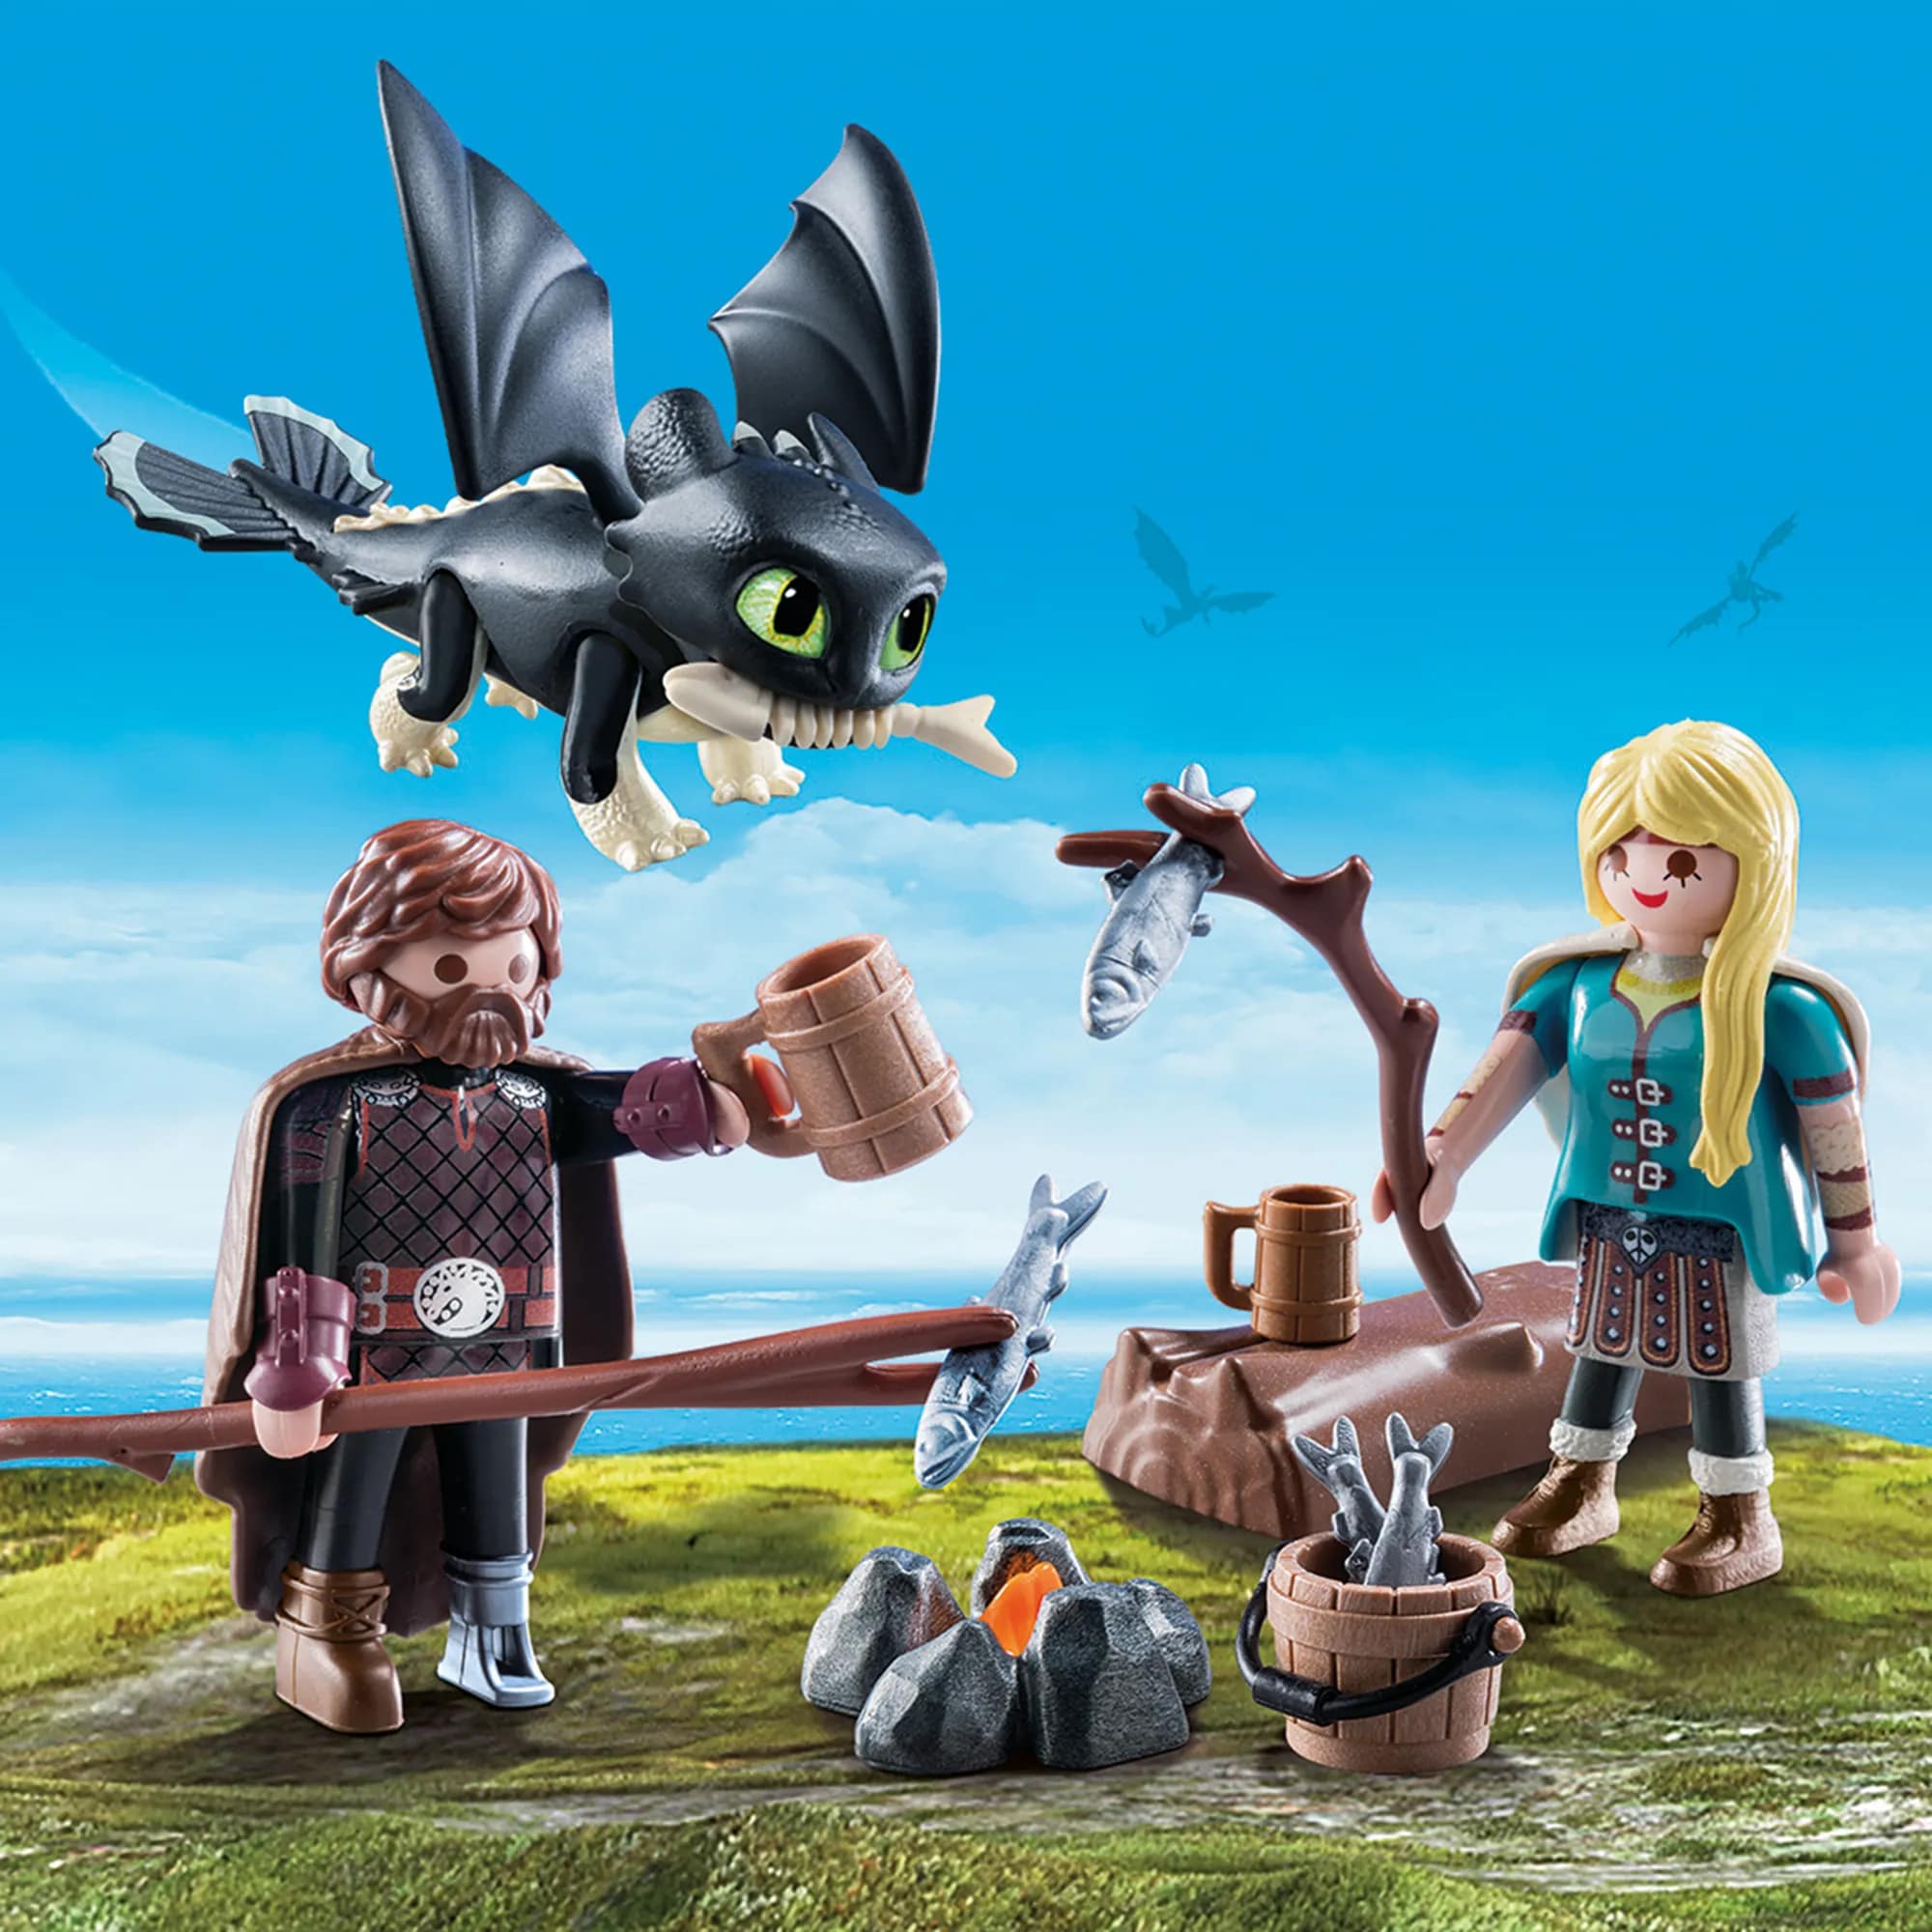 Playmobil Hiccup and Astrid with Baby Dragon